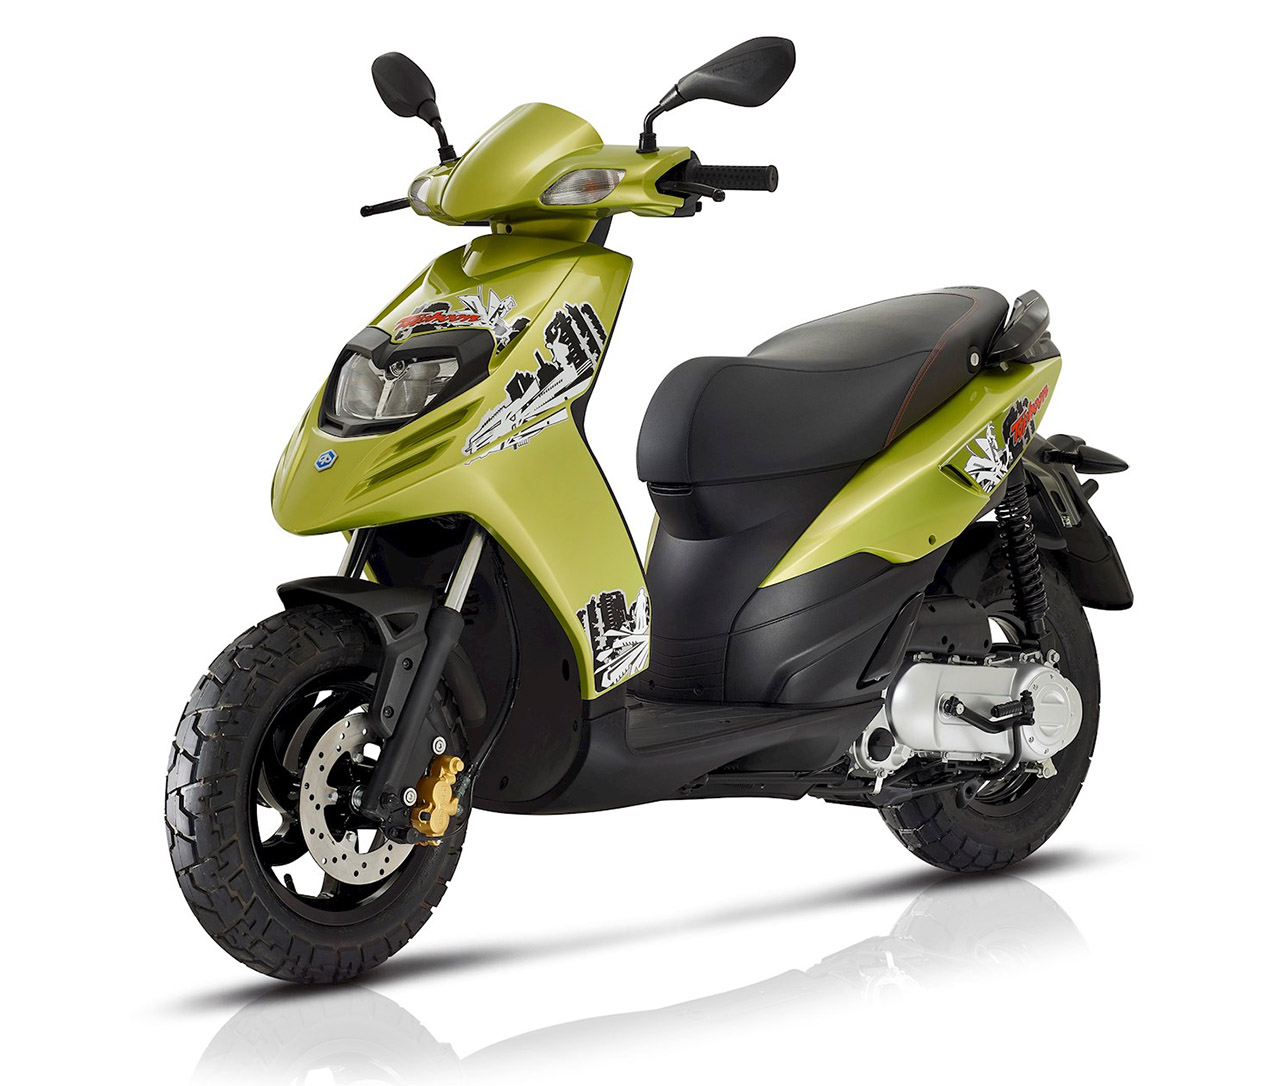 top rated 50cc scooters